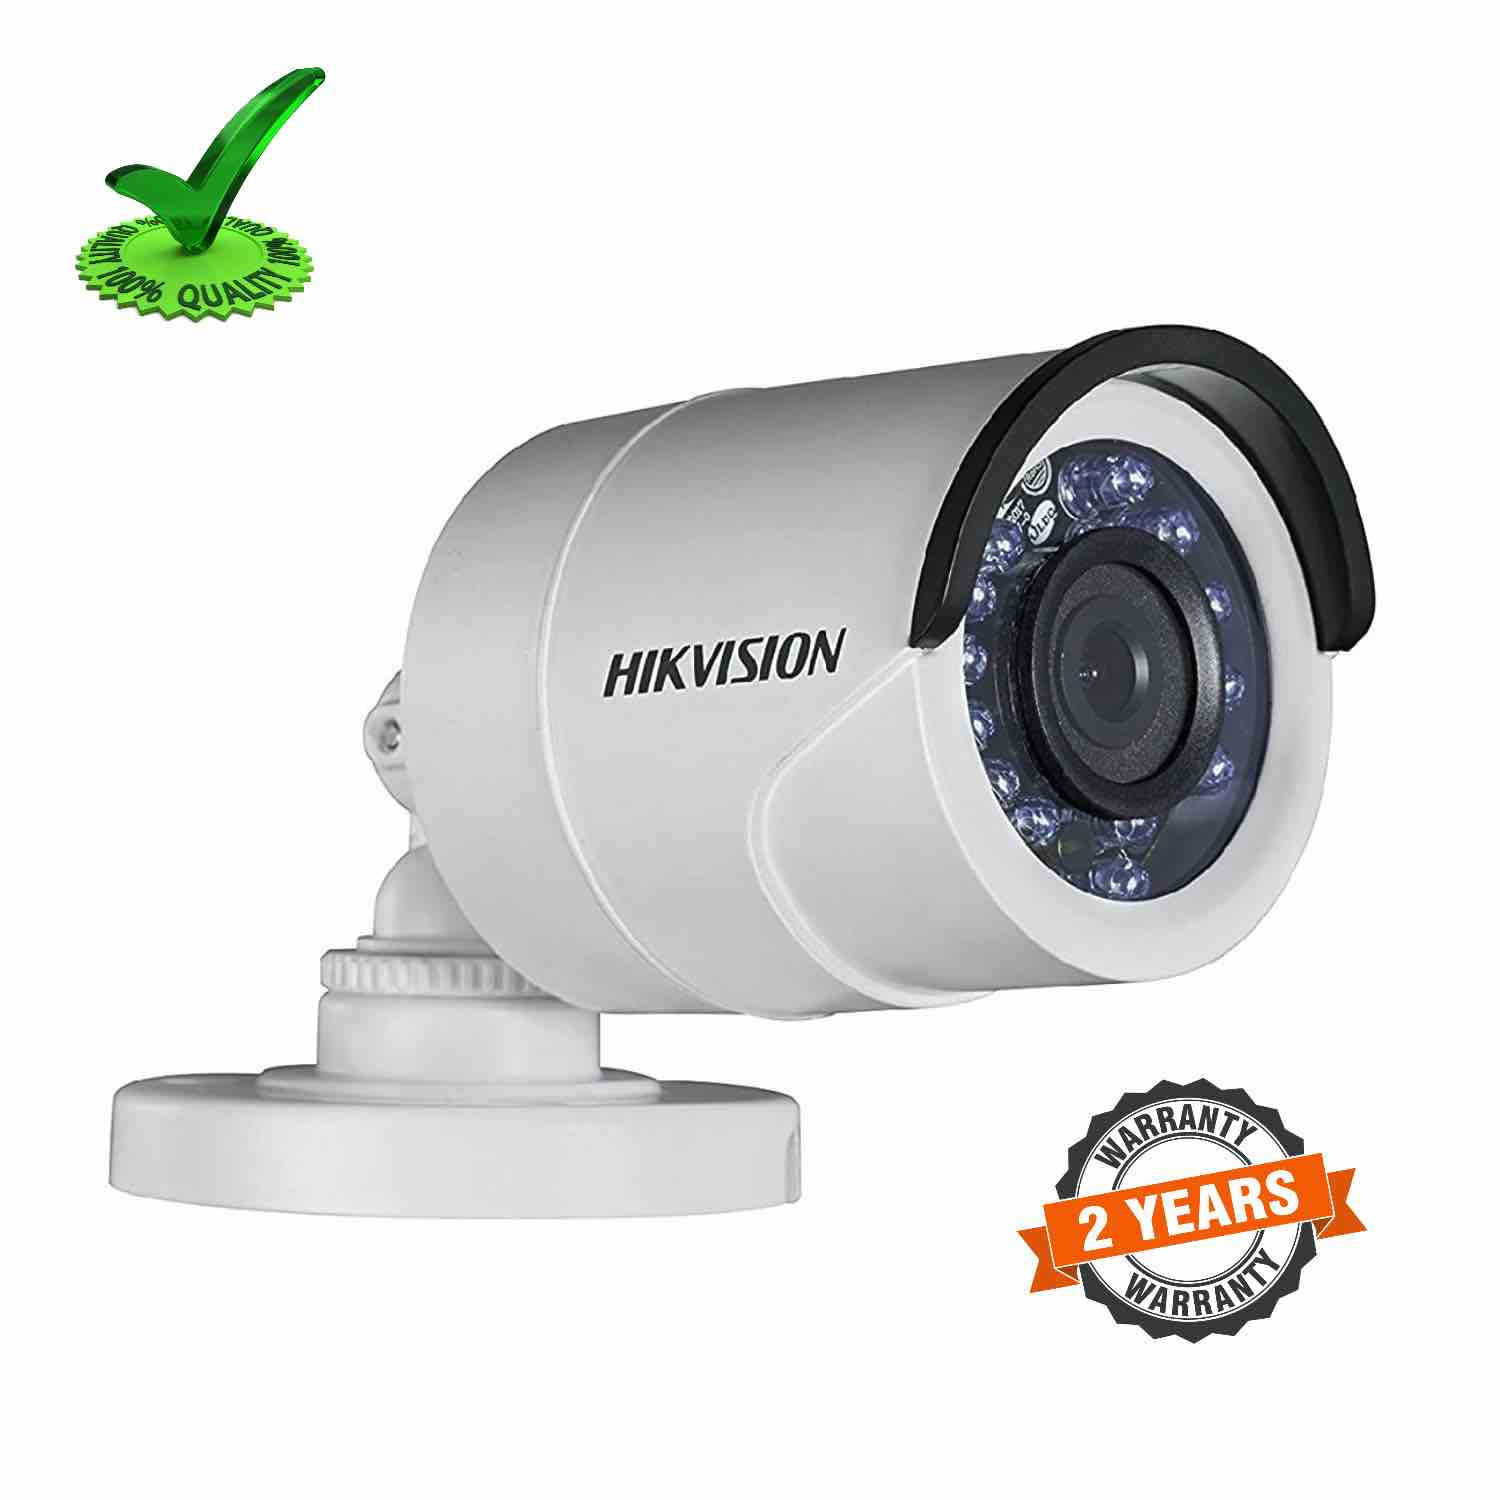  Hikvision DS-2CE1AD0T-IRPF 2mp HD 1080p outdoor Bullet Camera